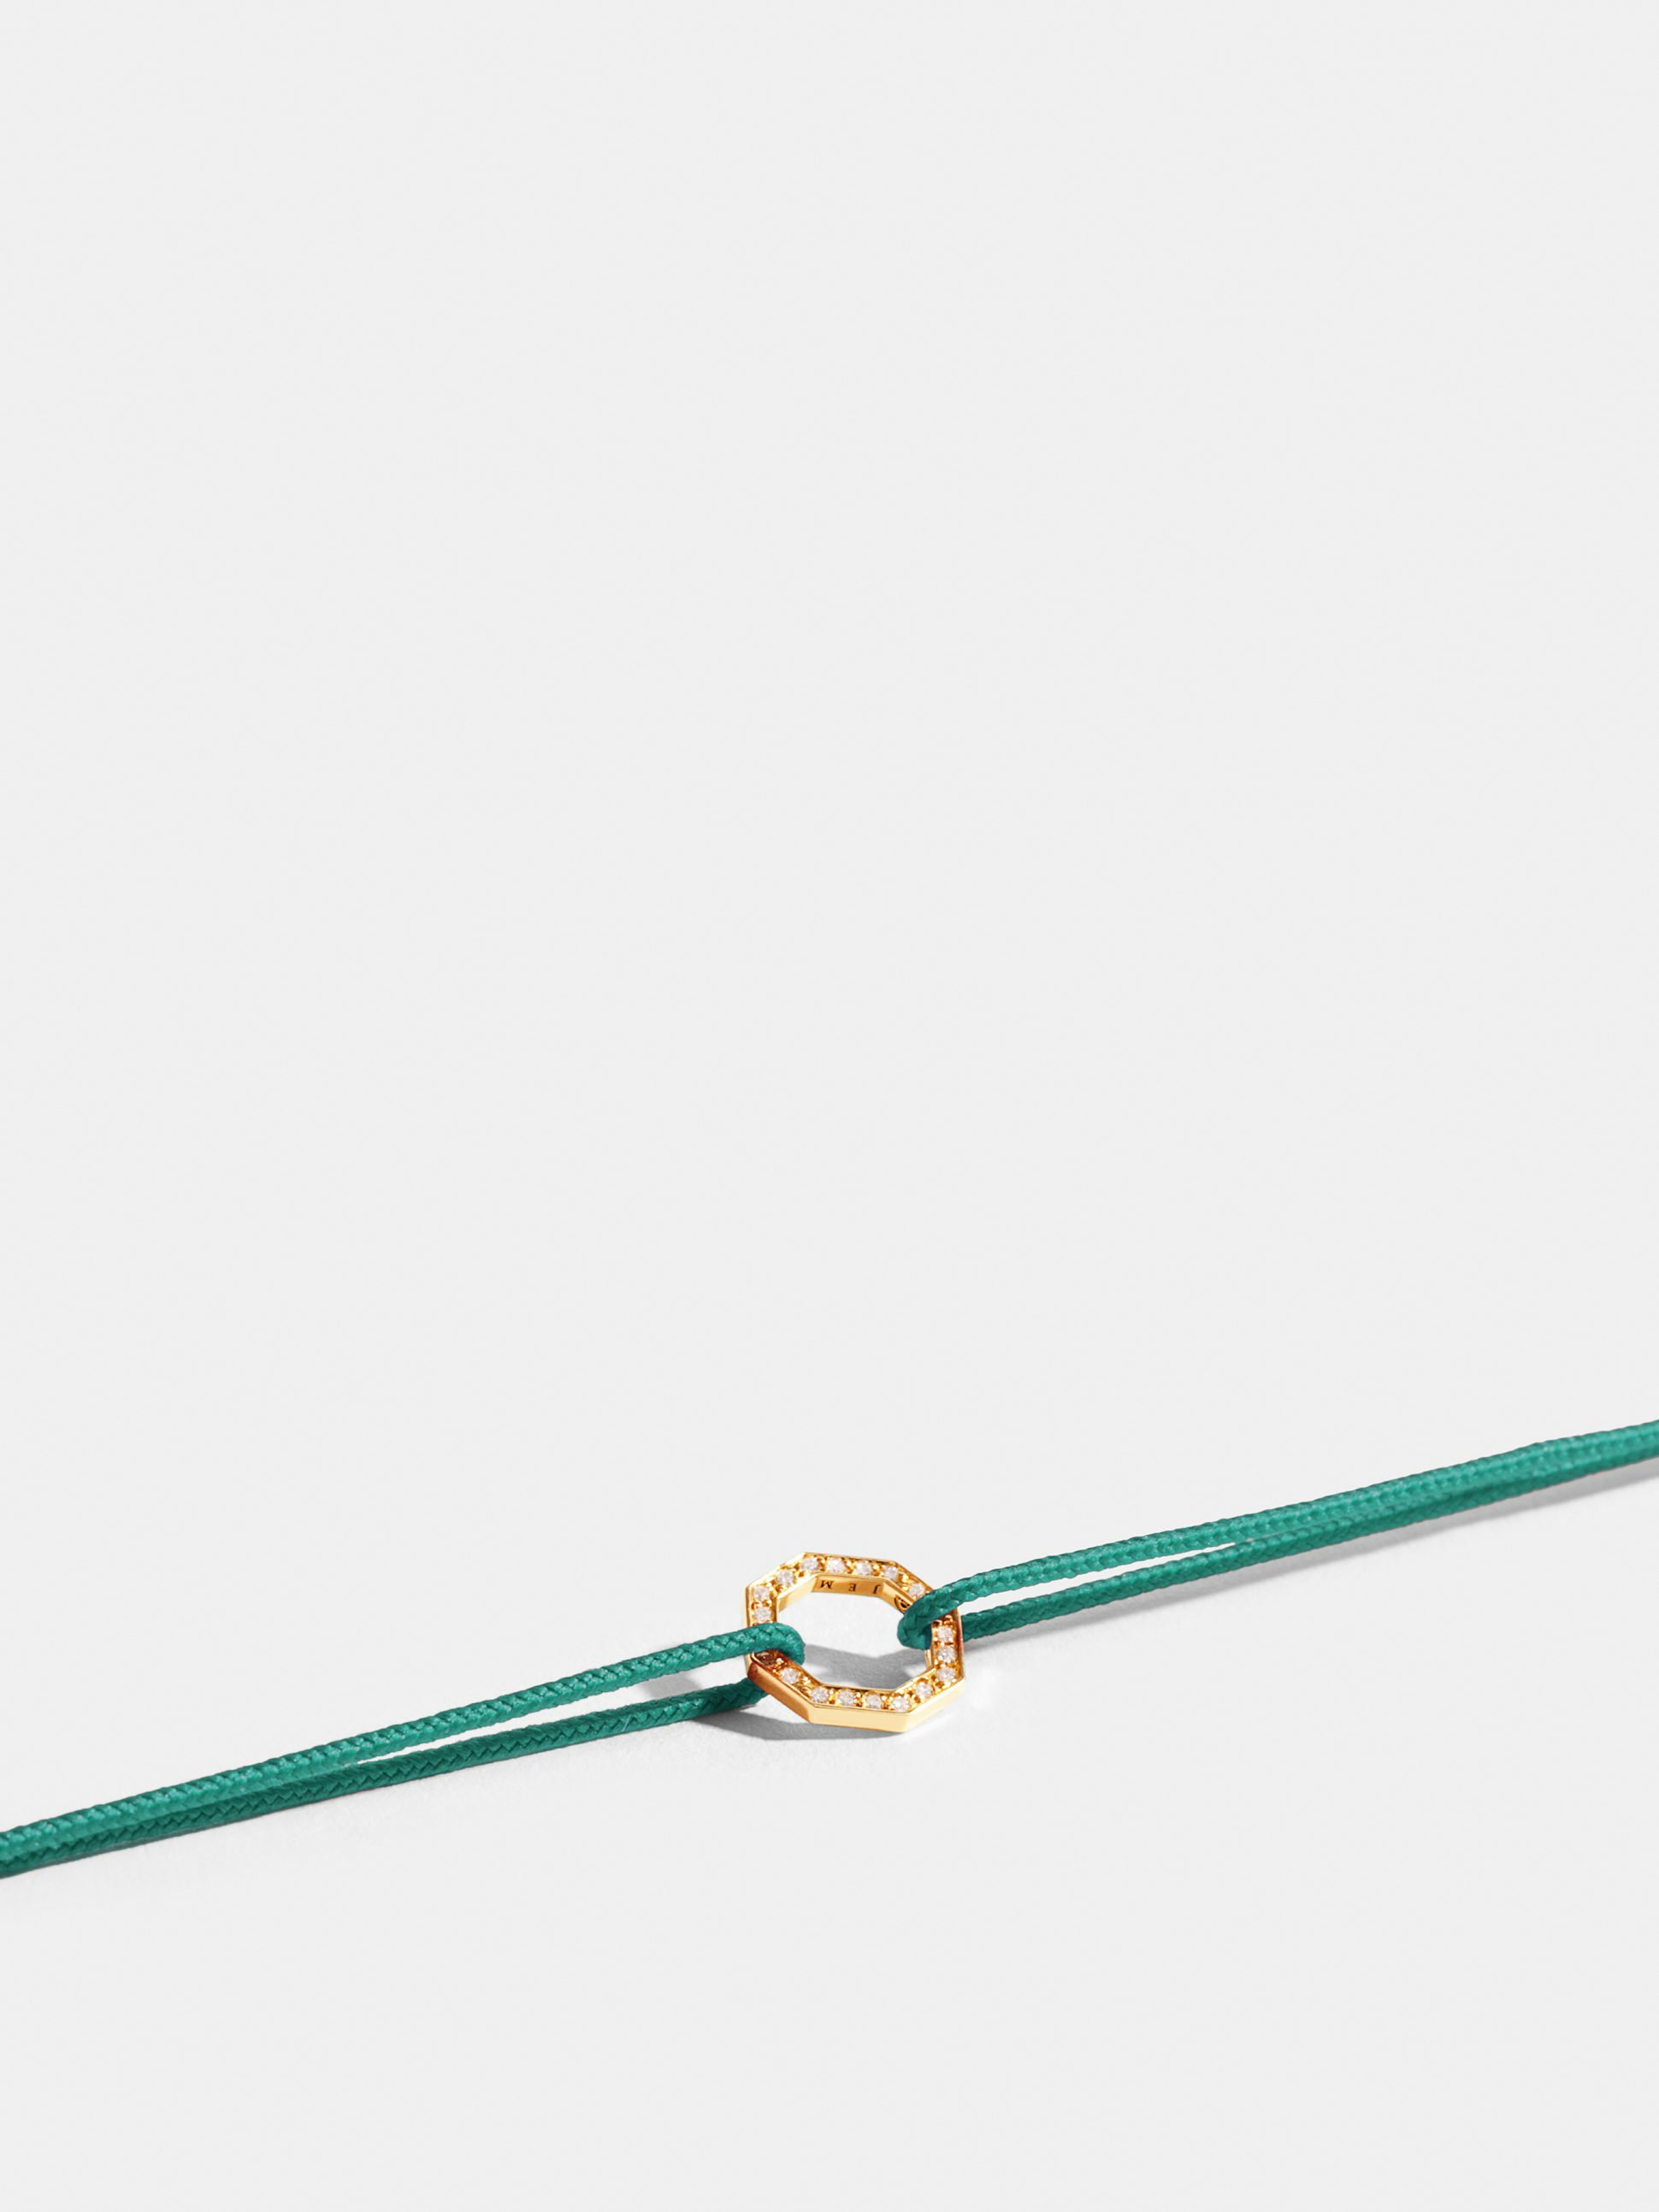 Octogone motif in 18k Fairmined ethical yellow gold, paved with lab-grown diamonds, on a turquoise blue cord.